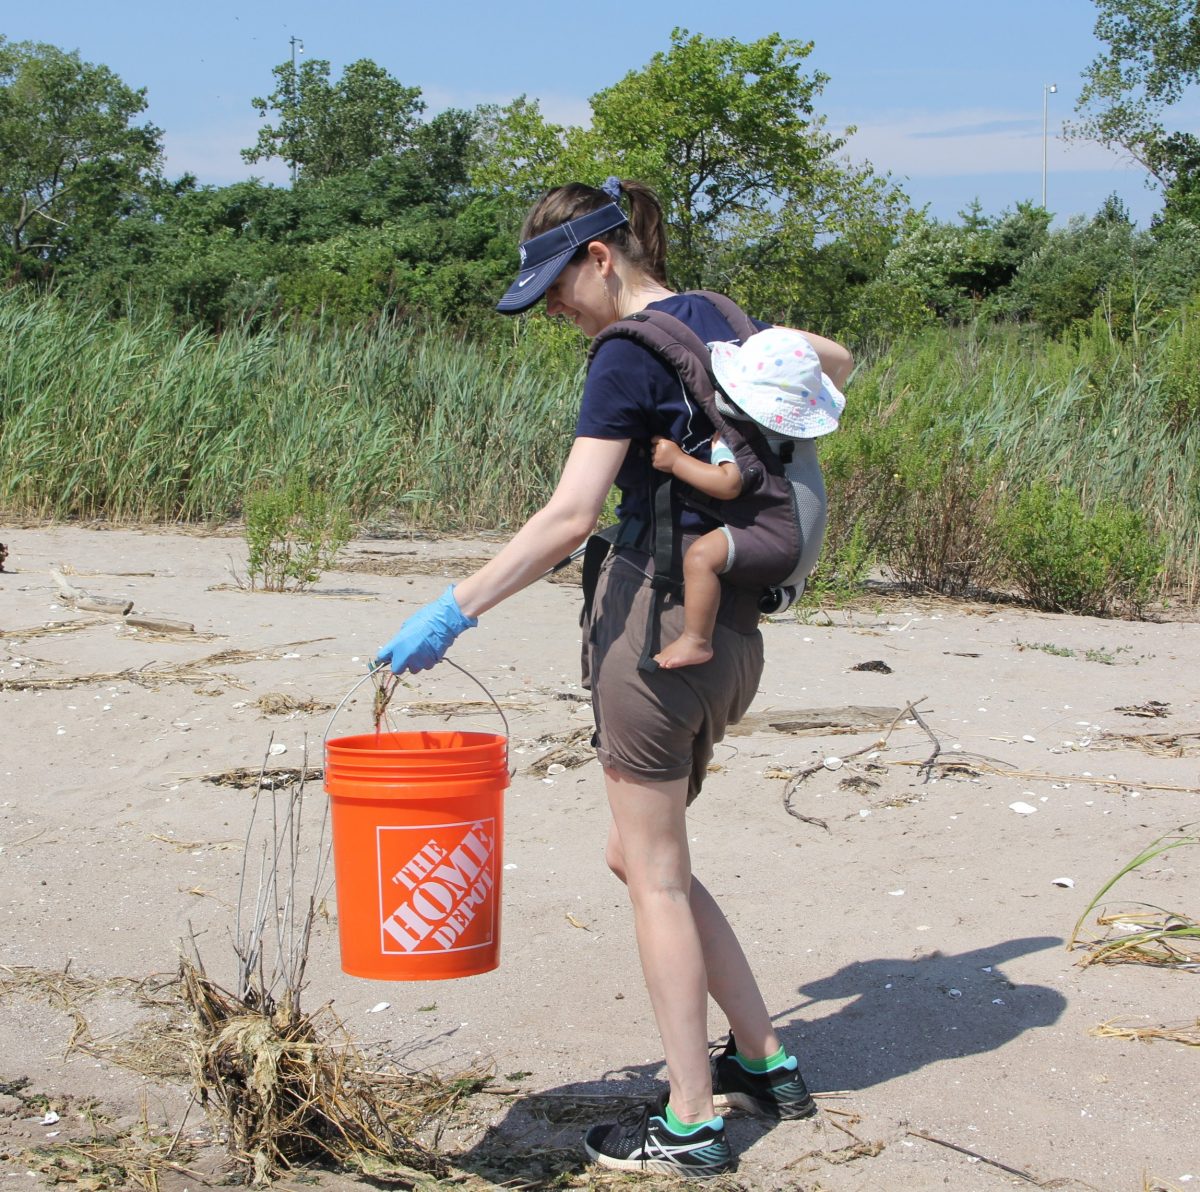 Deb Abibou, CT Sea Grant assistant extension educator-sustainable and resilient communities, joined in the cleanup with her 10-month-ol son in tow.